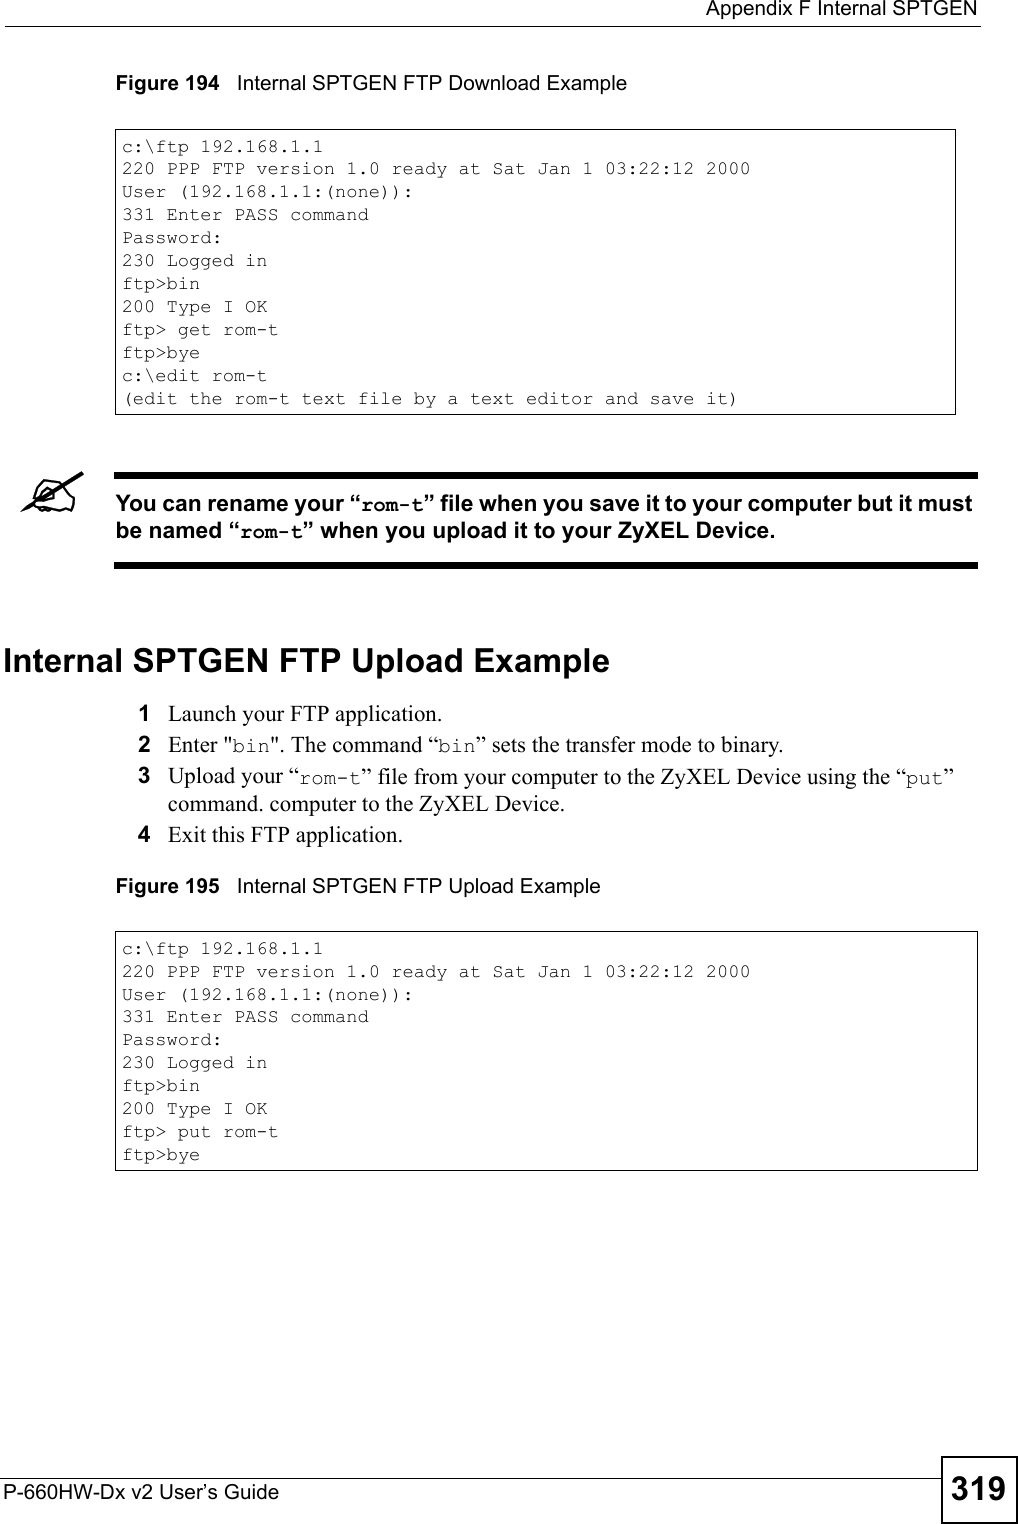  Appendix F Internal SPTGENP-660HW-Dx v2 User’s Guide 319Figure 194   Internal SPTGEN FTP Download Example&quot;You can rename your “rom-t” file when you save it to your computer but it must be named “rom-t” when you upload it to your ZyXEL Device.Internal SPTGEN FTP Upload Example1Launch your FTP application.2Enter &quot;bin&quot;. The command “bin” sets the transfer mode to binary.3Upload your “rom-t” file from your computer to the ZyXEL Device using the “put” command. computer to the ZyXEL Device.4Exit this FTP application.Figure 195   Internal SPTGEN FTP Upload Examplec:\ftp 192.168.1.1220 PPP FTP version 1.0 ready at Sat Jan 1 03:22:12 2000User (192.168.1.1:(none)):331 Enter PASS commandPassword:230 Logged inftp&gt;bin200 Type I OKftp&gt; get rom-tftp&gt;byec:\edit rom-t(edit the rom-t text file by a text editor and save it)c:\ftp 192.168.1.1220 PPP FTP version 1.0 ready at Sat Jan 1 03:22:12 2000User (192.168.1.1:(none)):331 Enter PASS commandPassword:230 Logged inftp&gt;bin200 Type I OKftp&gt; put rom-tftp&gt;bye